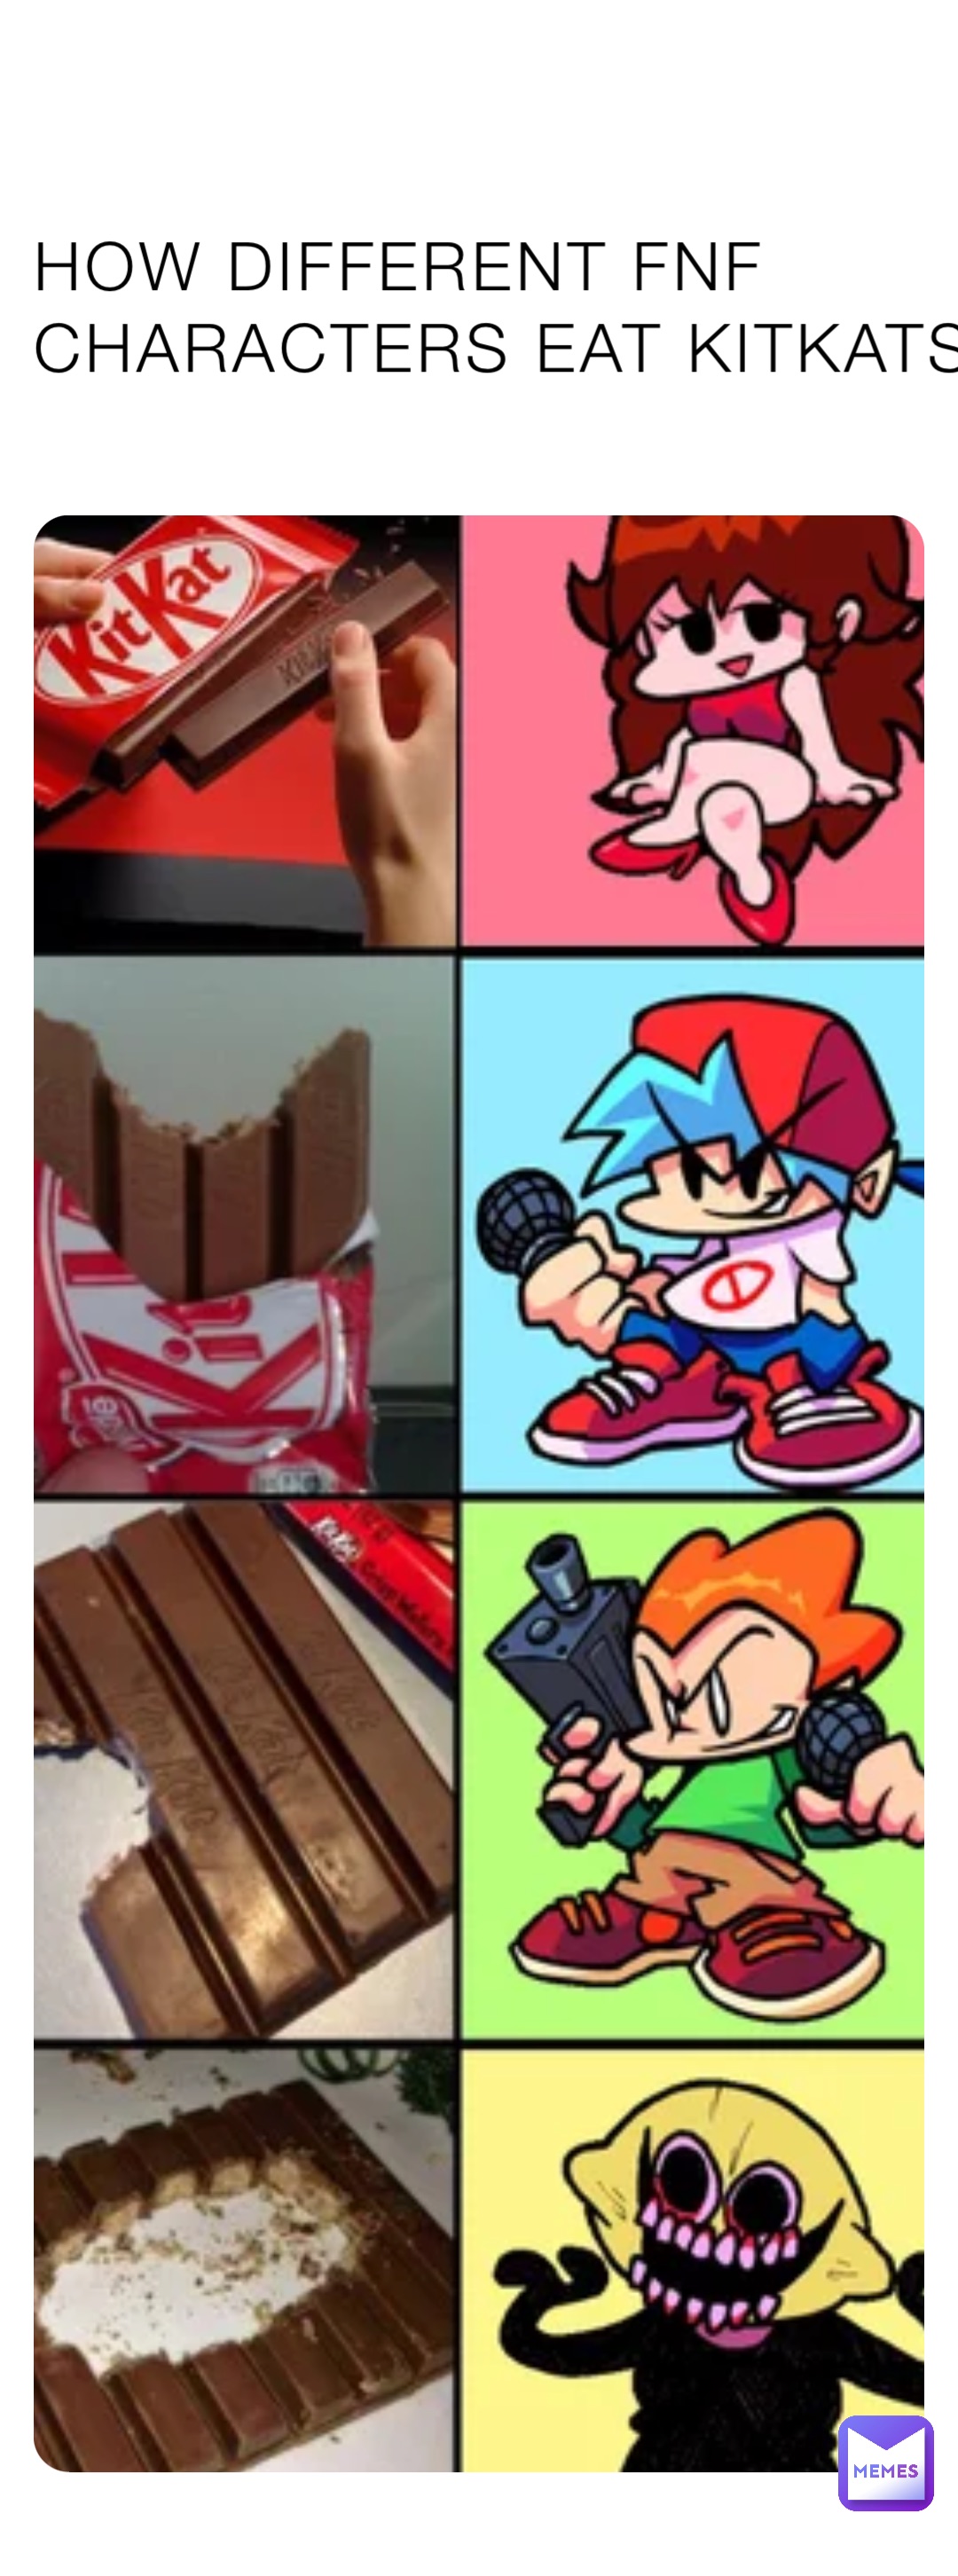 HOW DIFFERENT FNF CHARACTERS EAT KITKATS